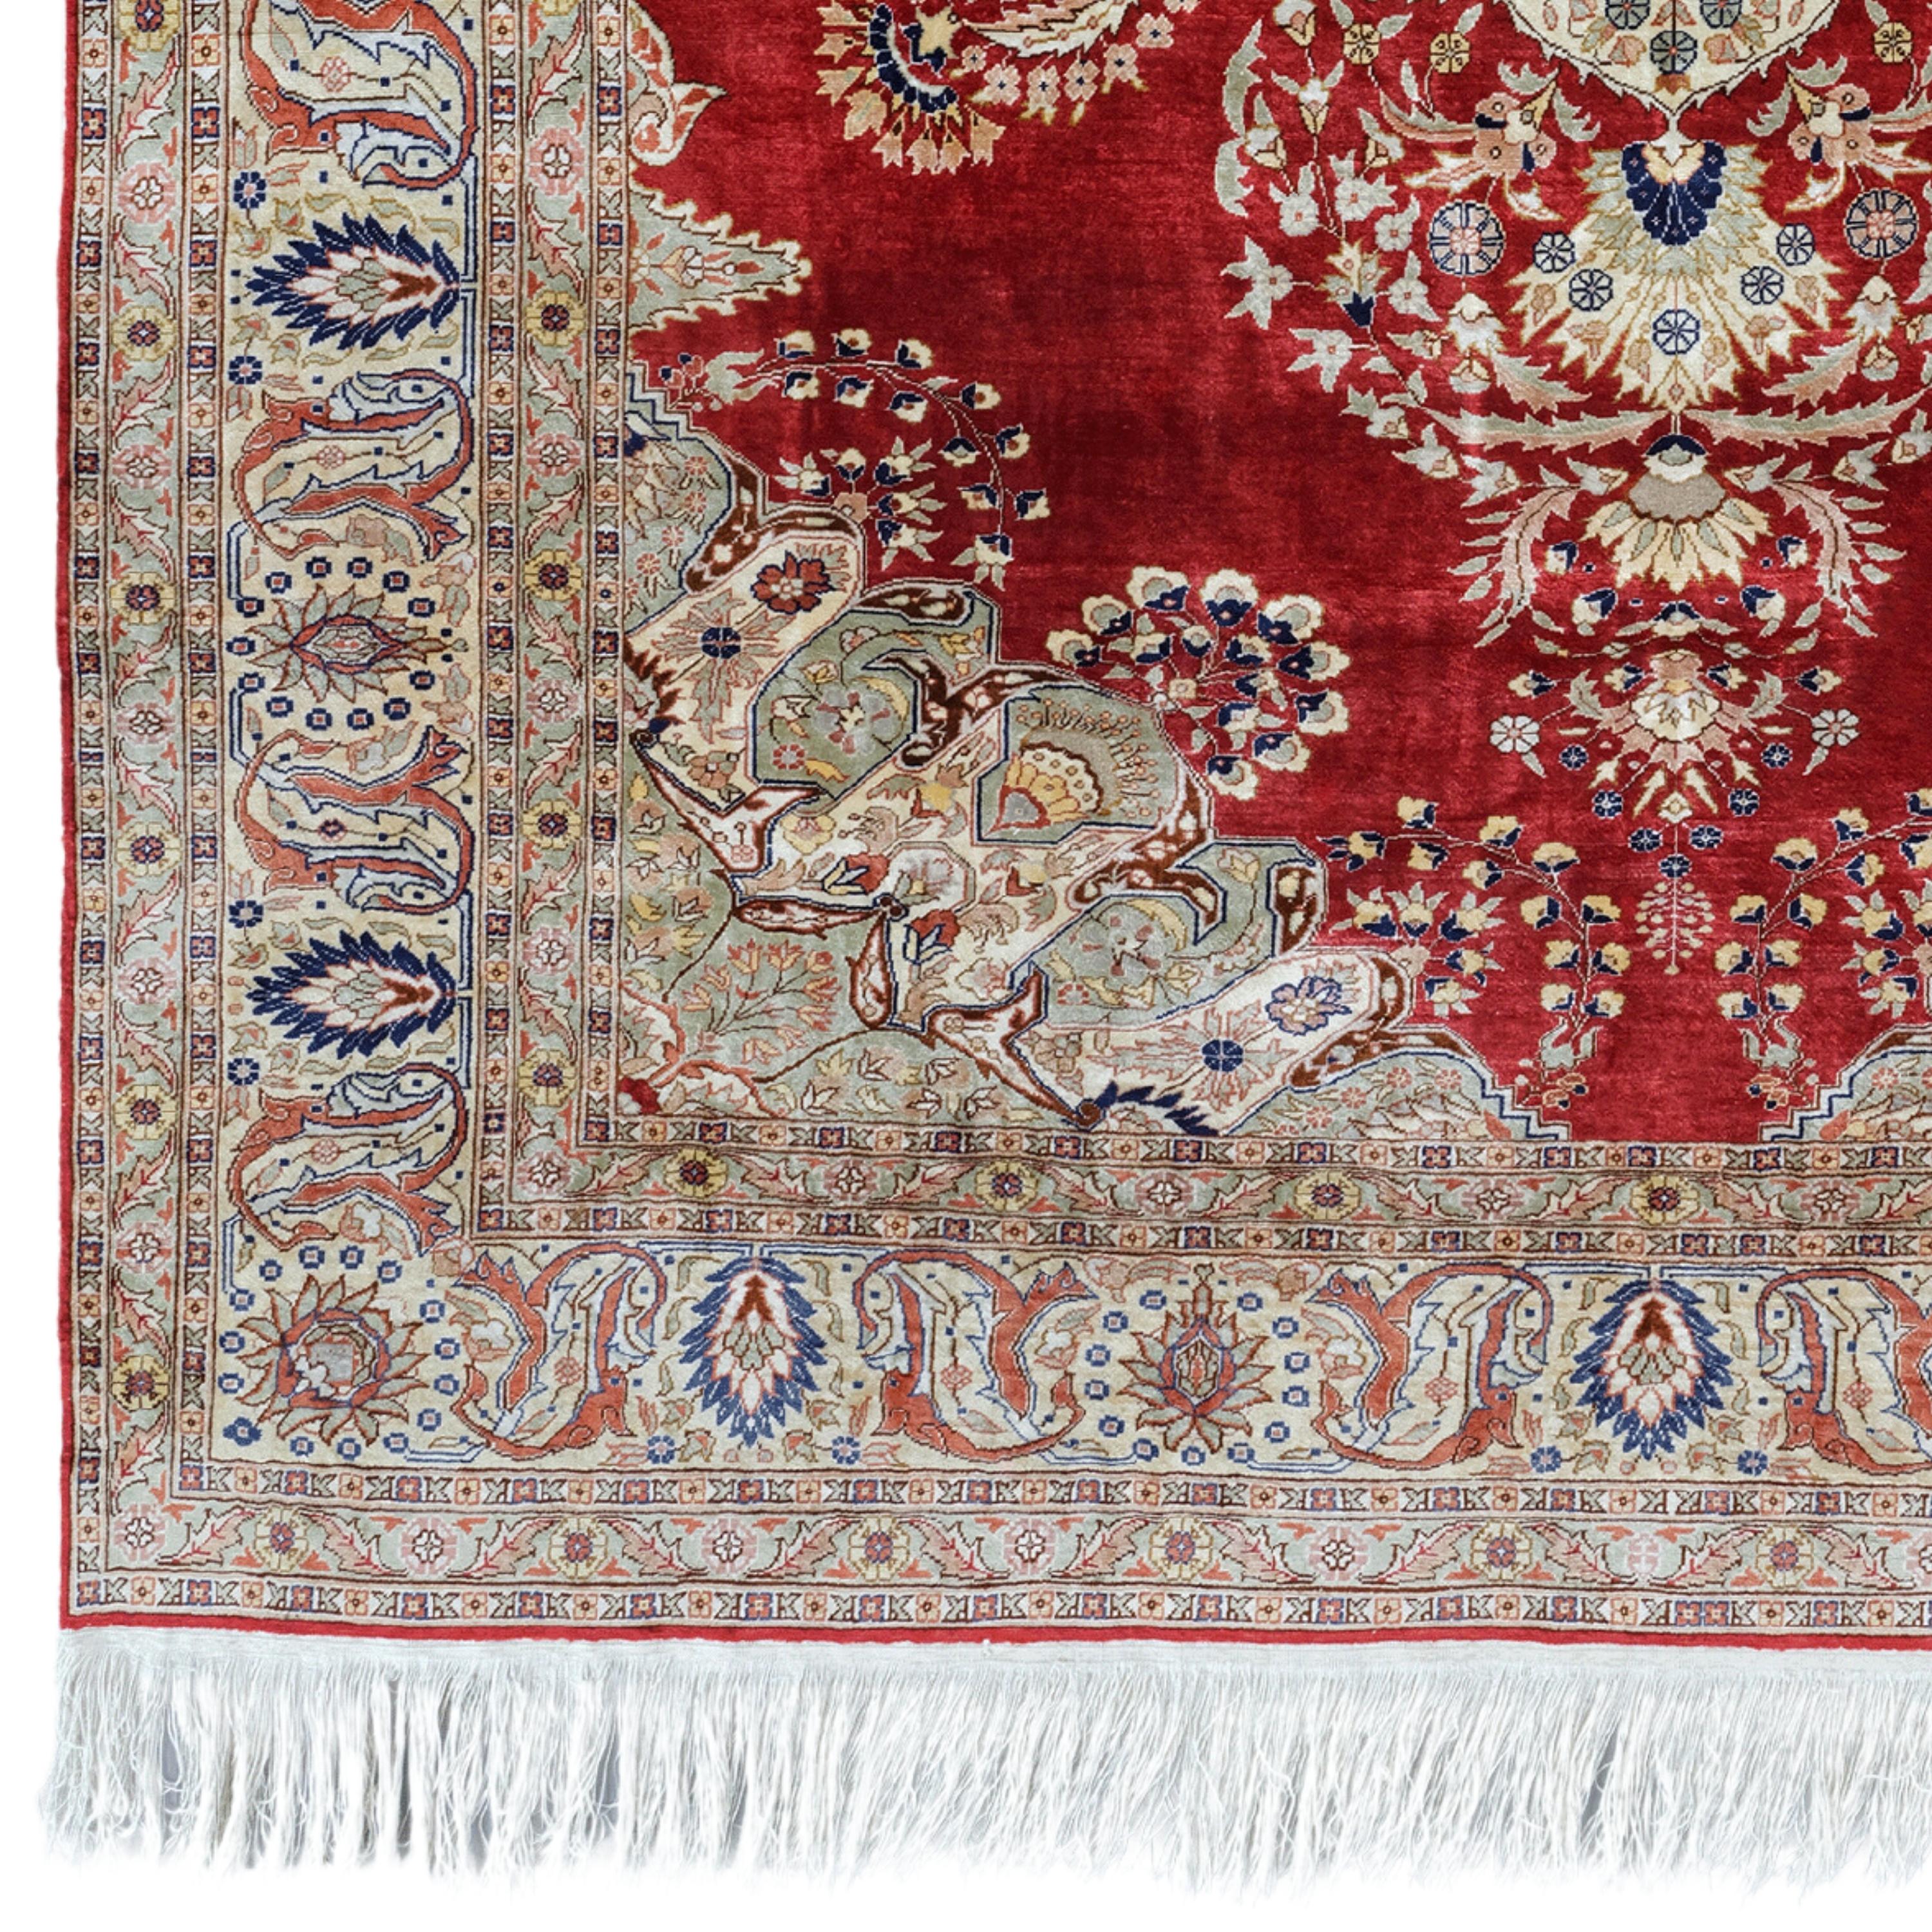 The Art of the Elegant Touch This antique silk Kayseri carpet from the early 20th century stands out with its intricate floral and geometric patterns embroidered on a rich and deep red background. Colors in shades of cream, blue and gold adorn the